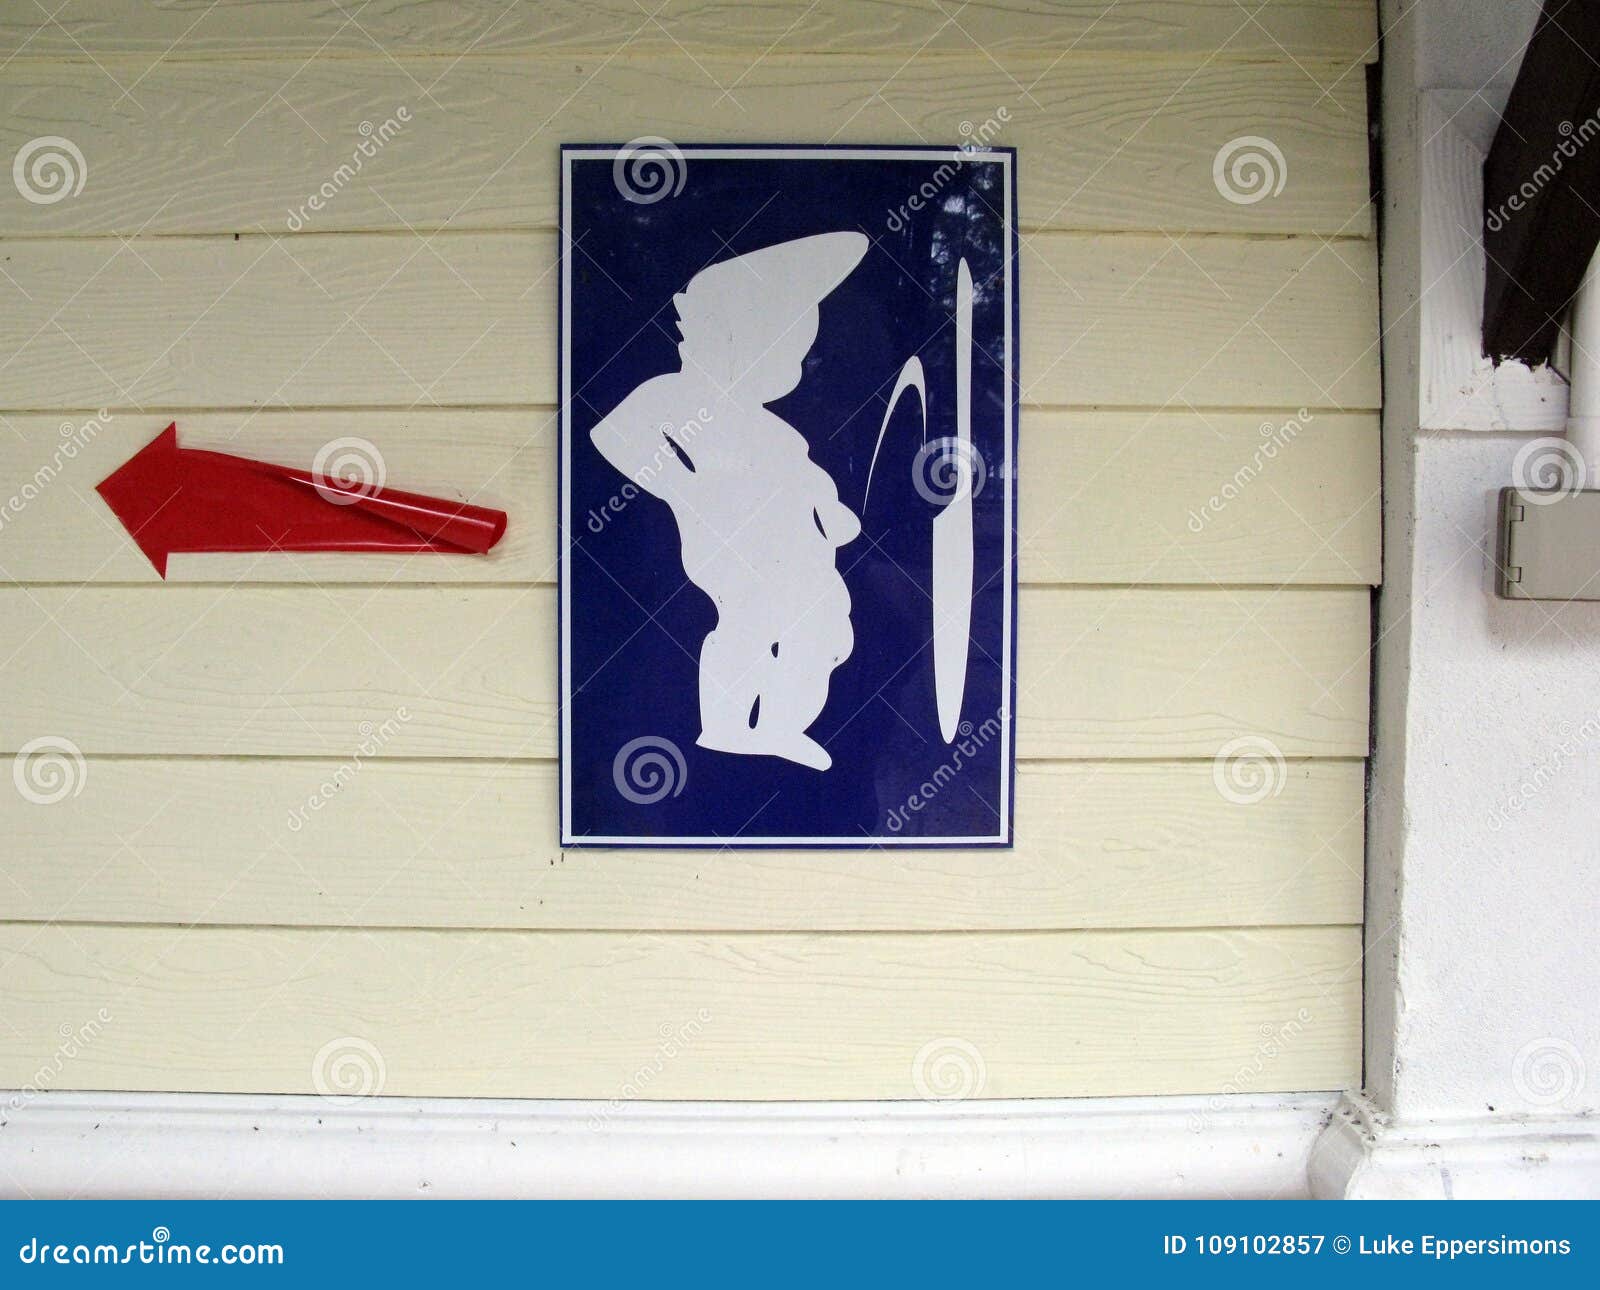 Funny Bathroom Sign in Phi Phi Islands in Thailand Stock Image - Image of  boys, like: 109102857